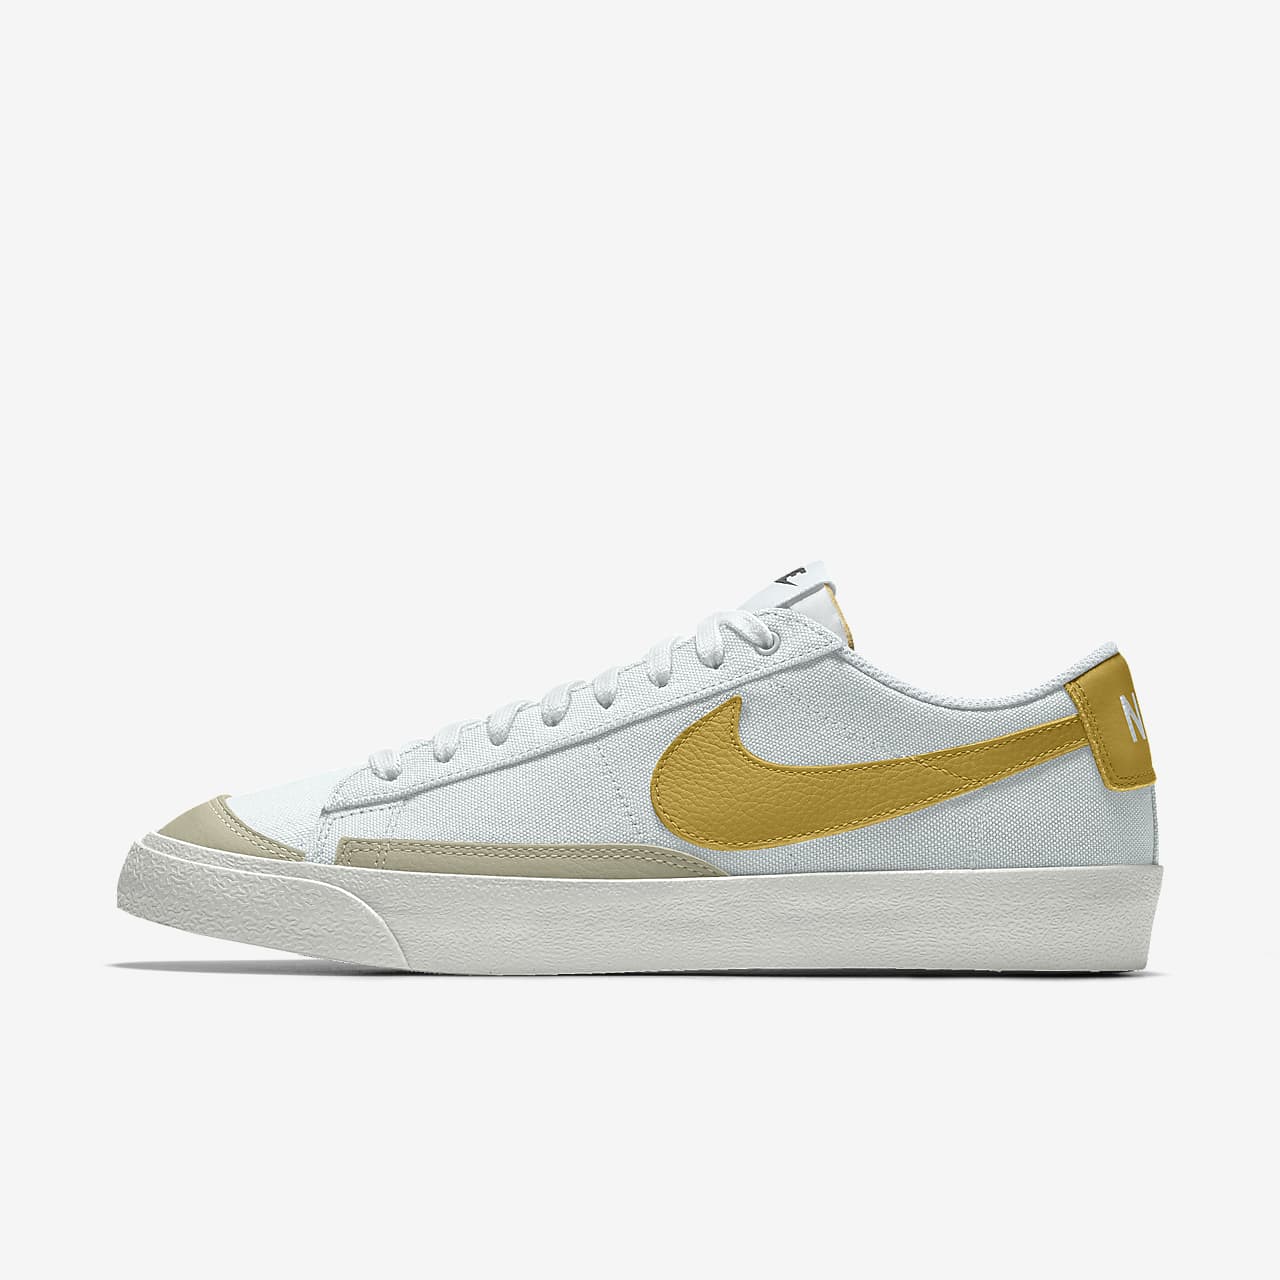 Chaussure personnalisable Nike Blazer Low '77 By You pour Femme